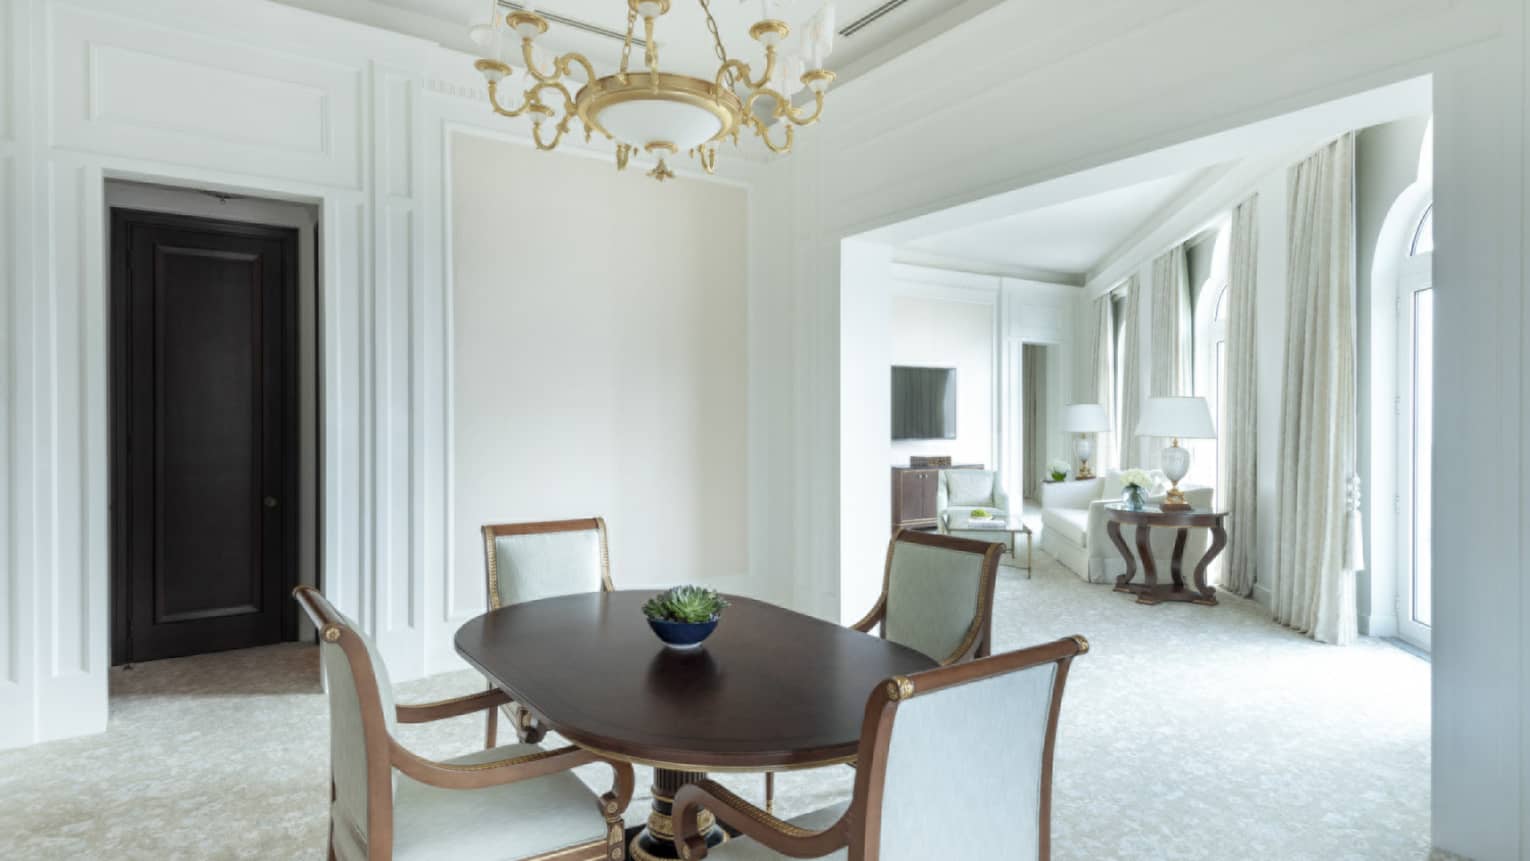 Dining room with white walls, dark wooden dining table and four ivory upholstered chairs, chandelier